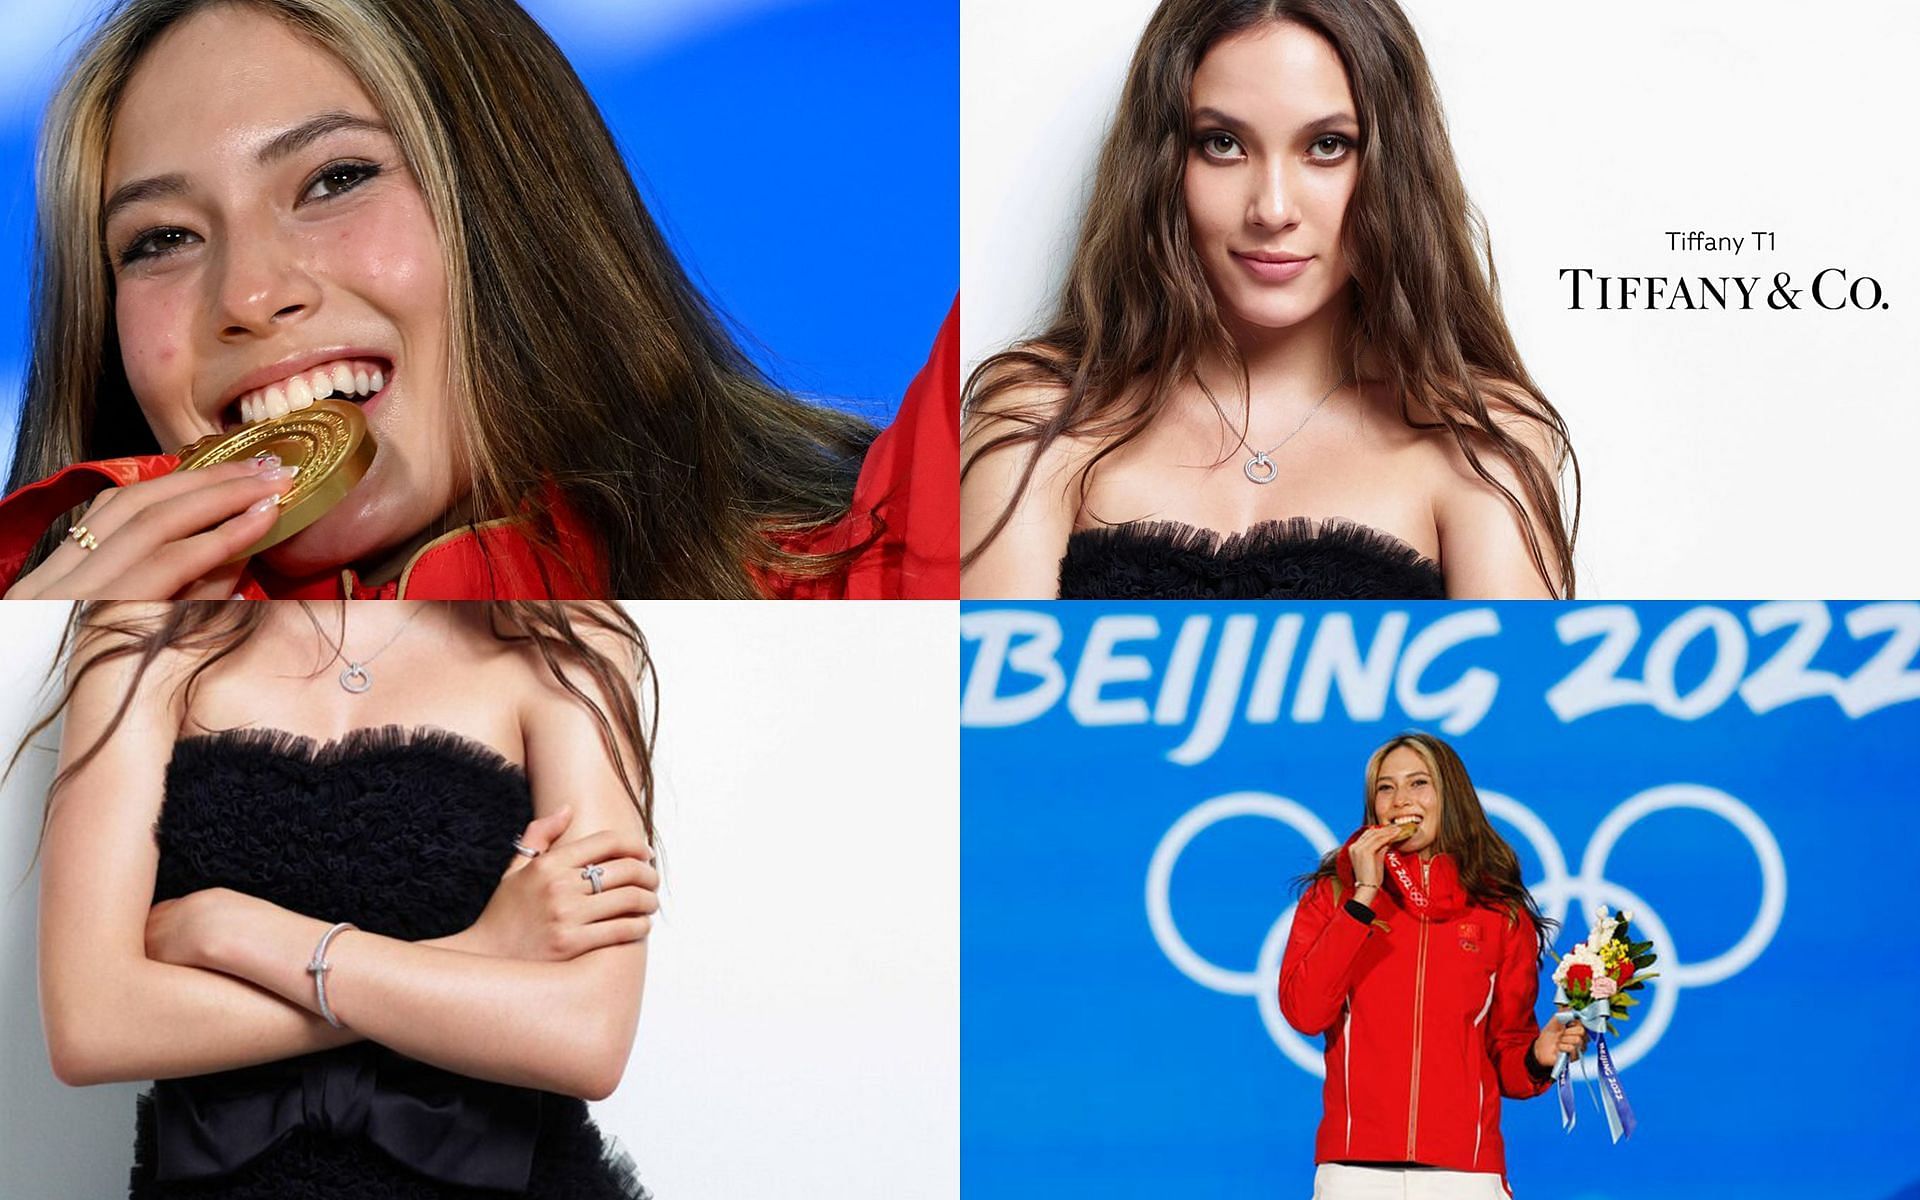 Winter Olympics: Eileen Gu is the very glamorous - and